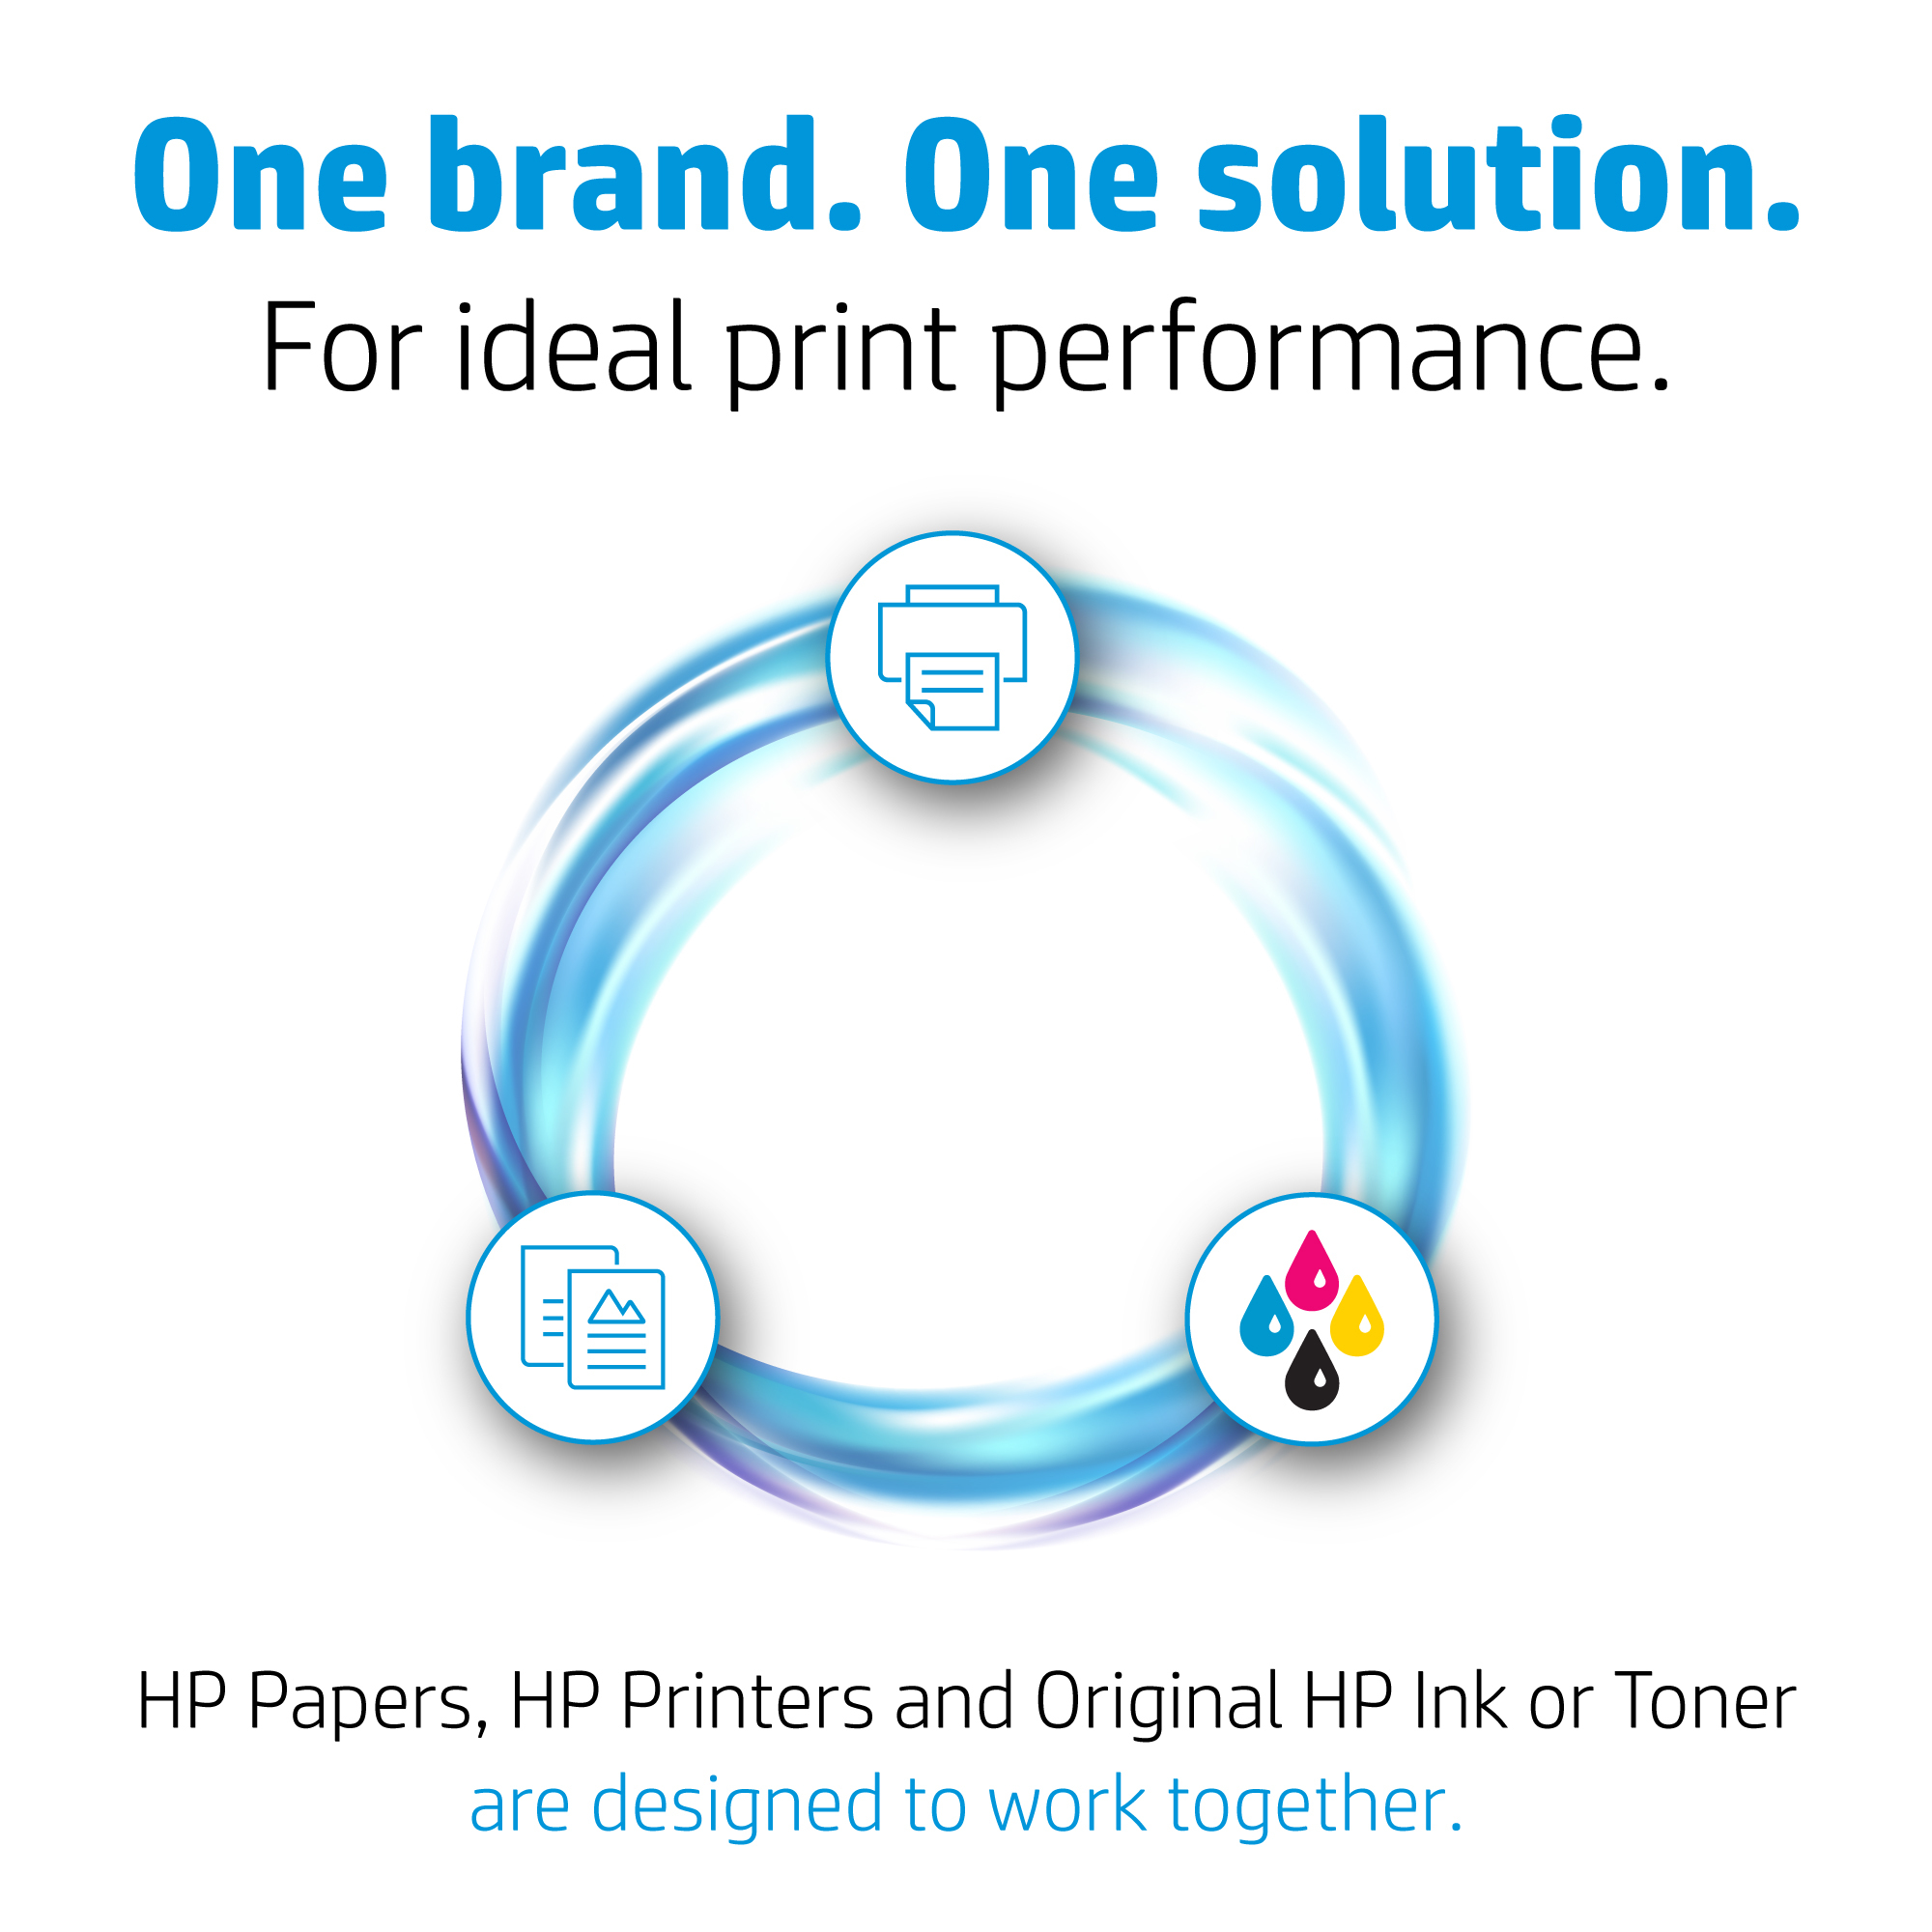 HP White A3 Advanced Glossy Photo Paper (Pack of 20) Q8697A